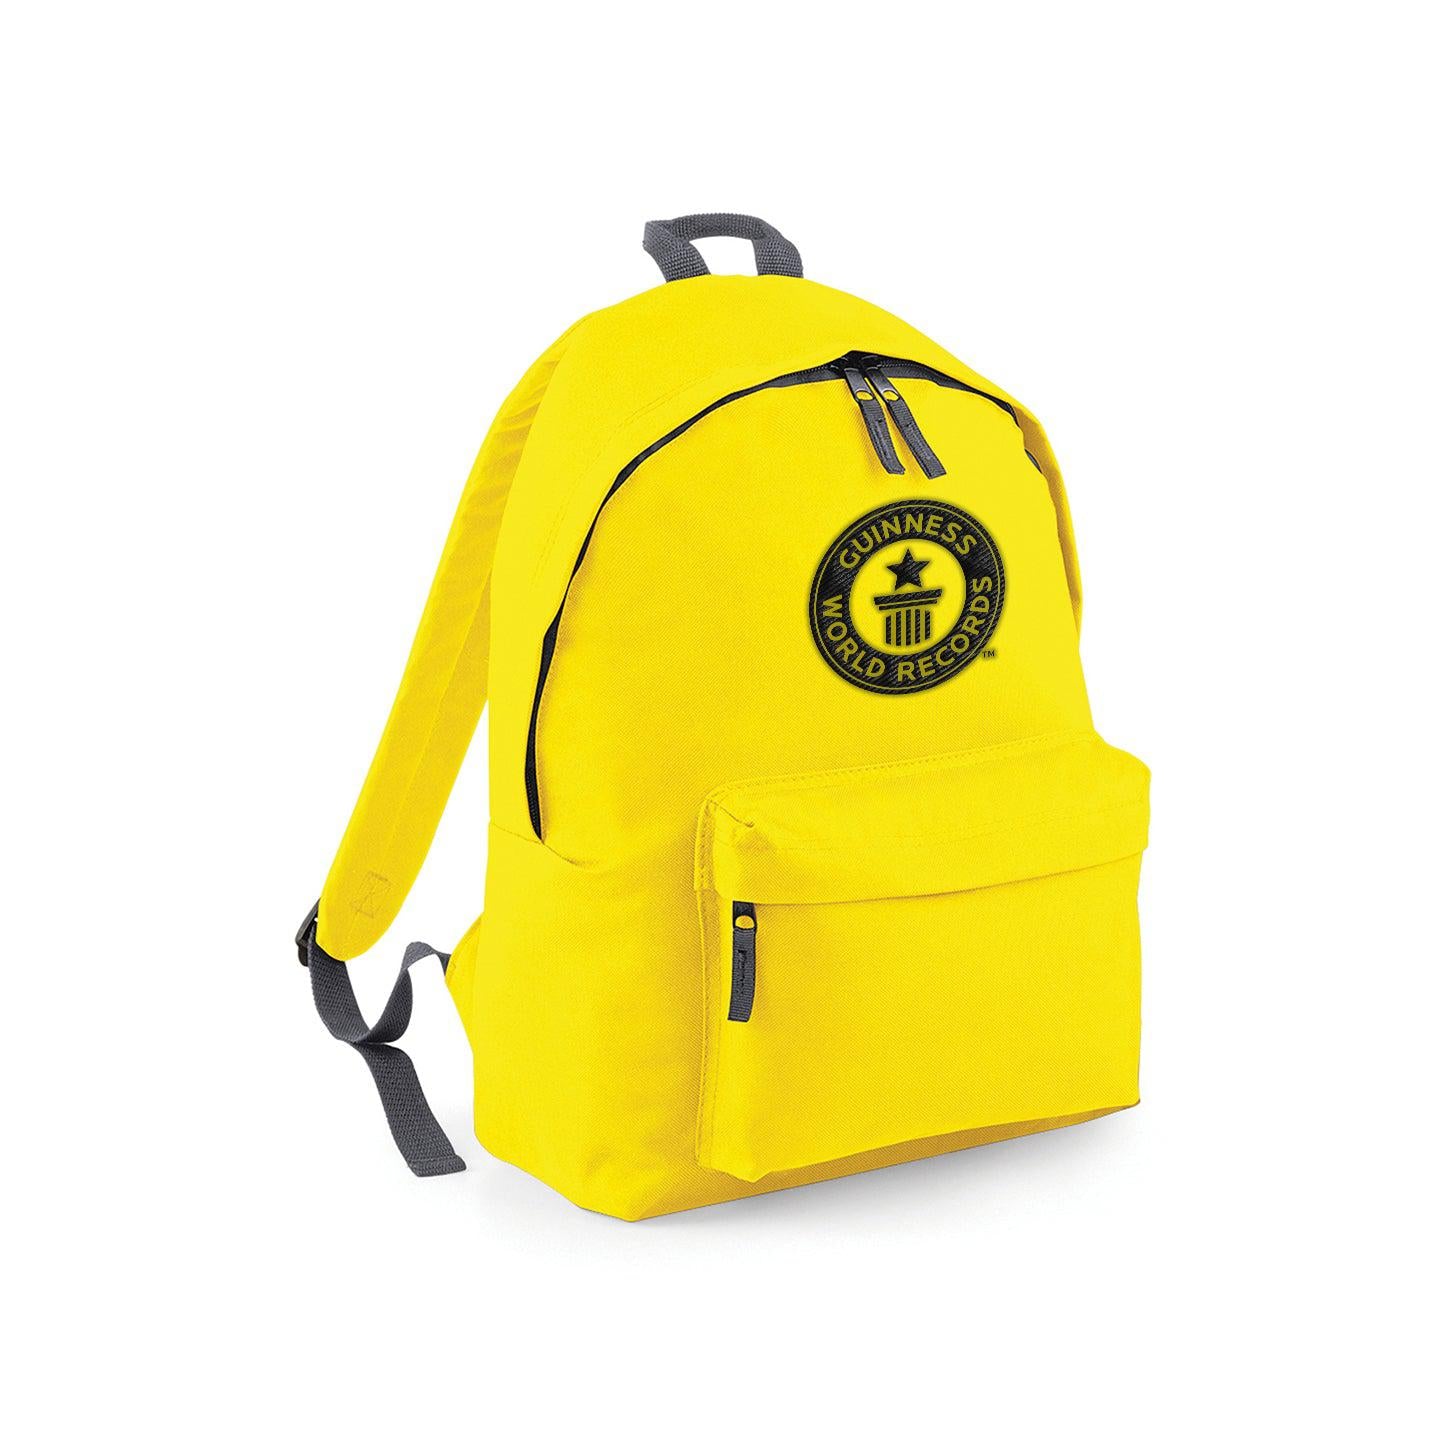 Backpack with black logo